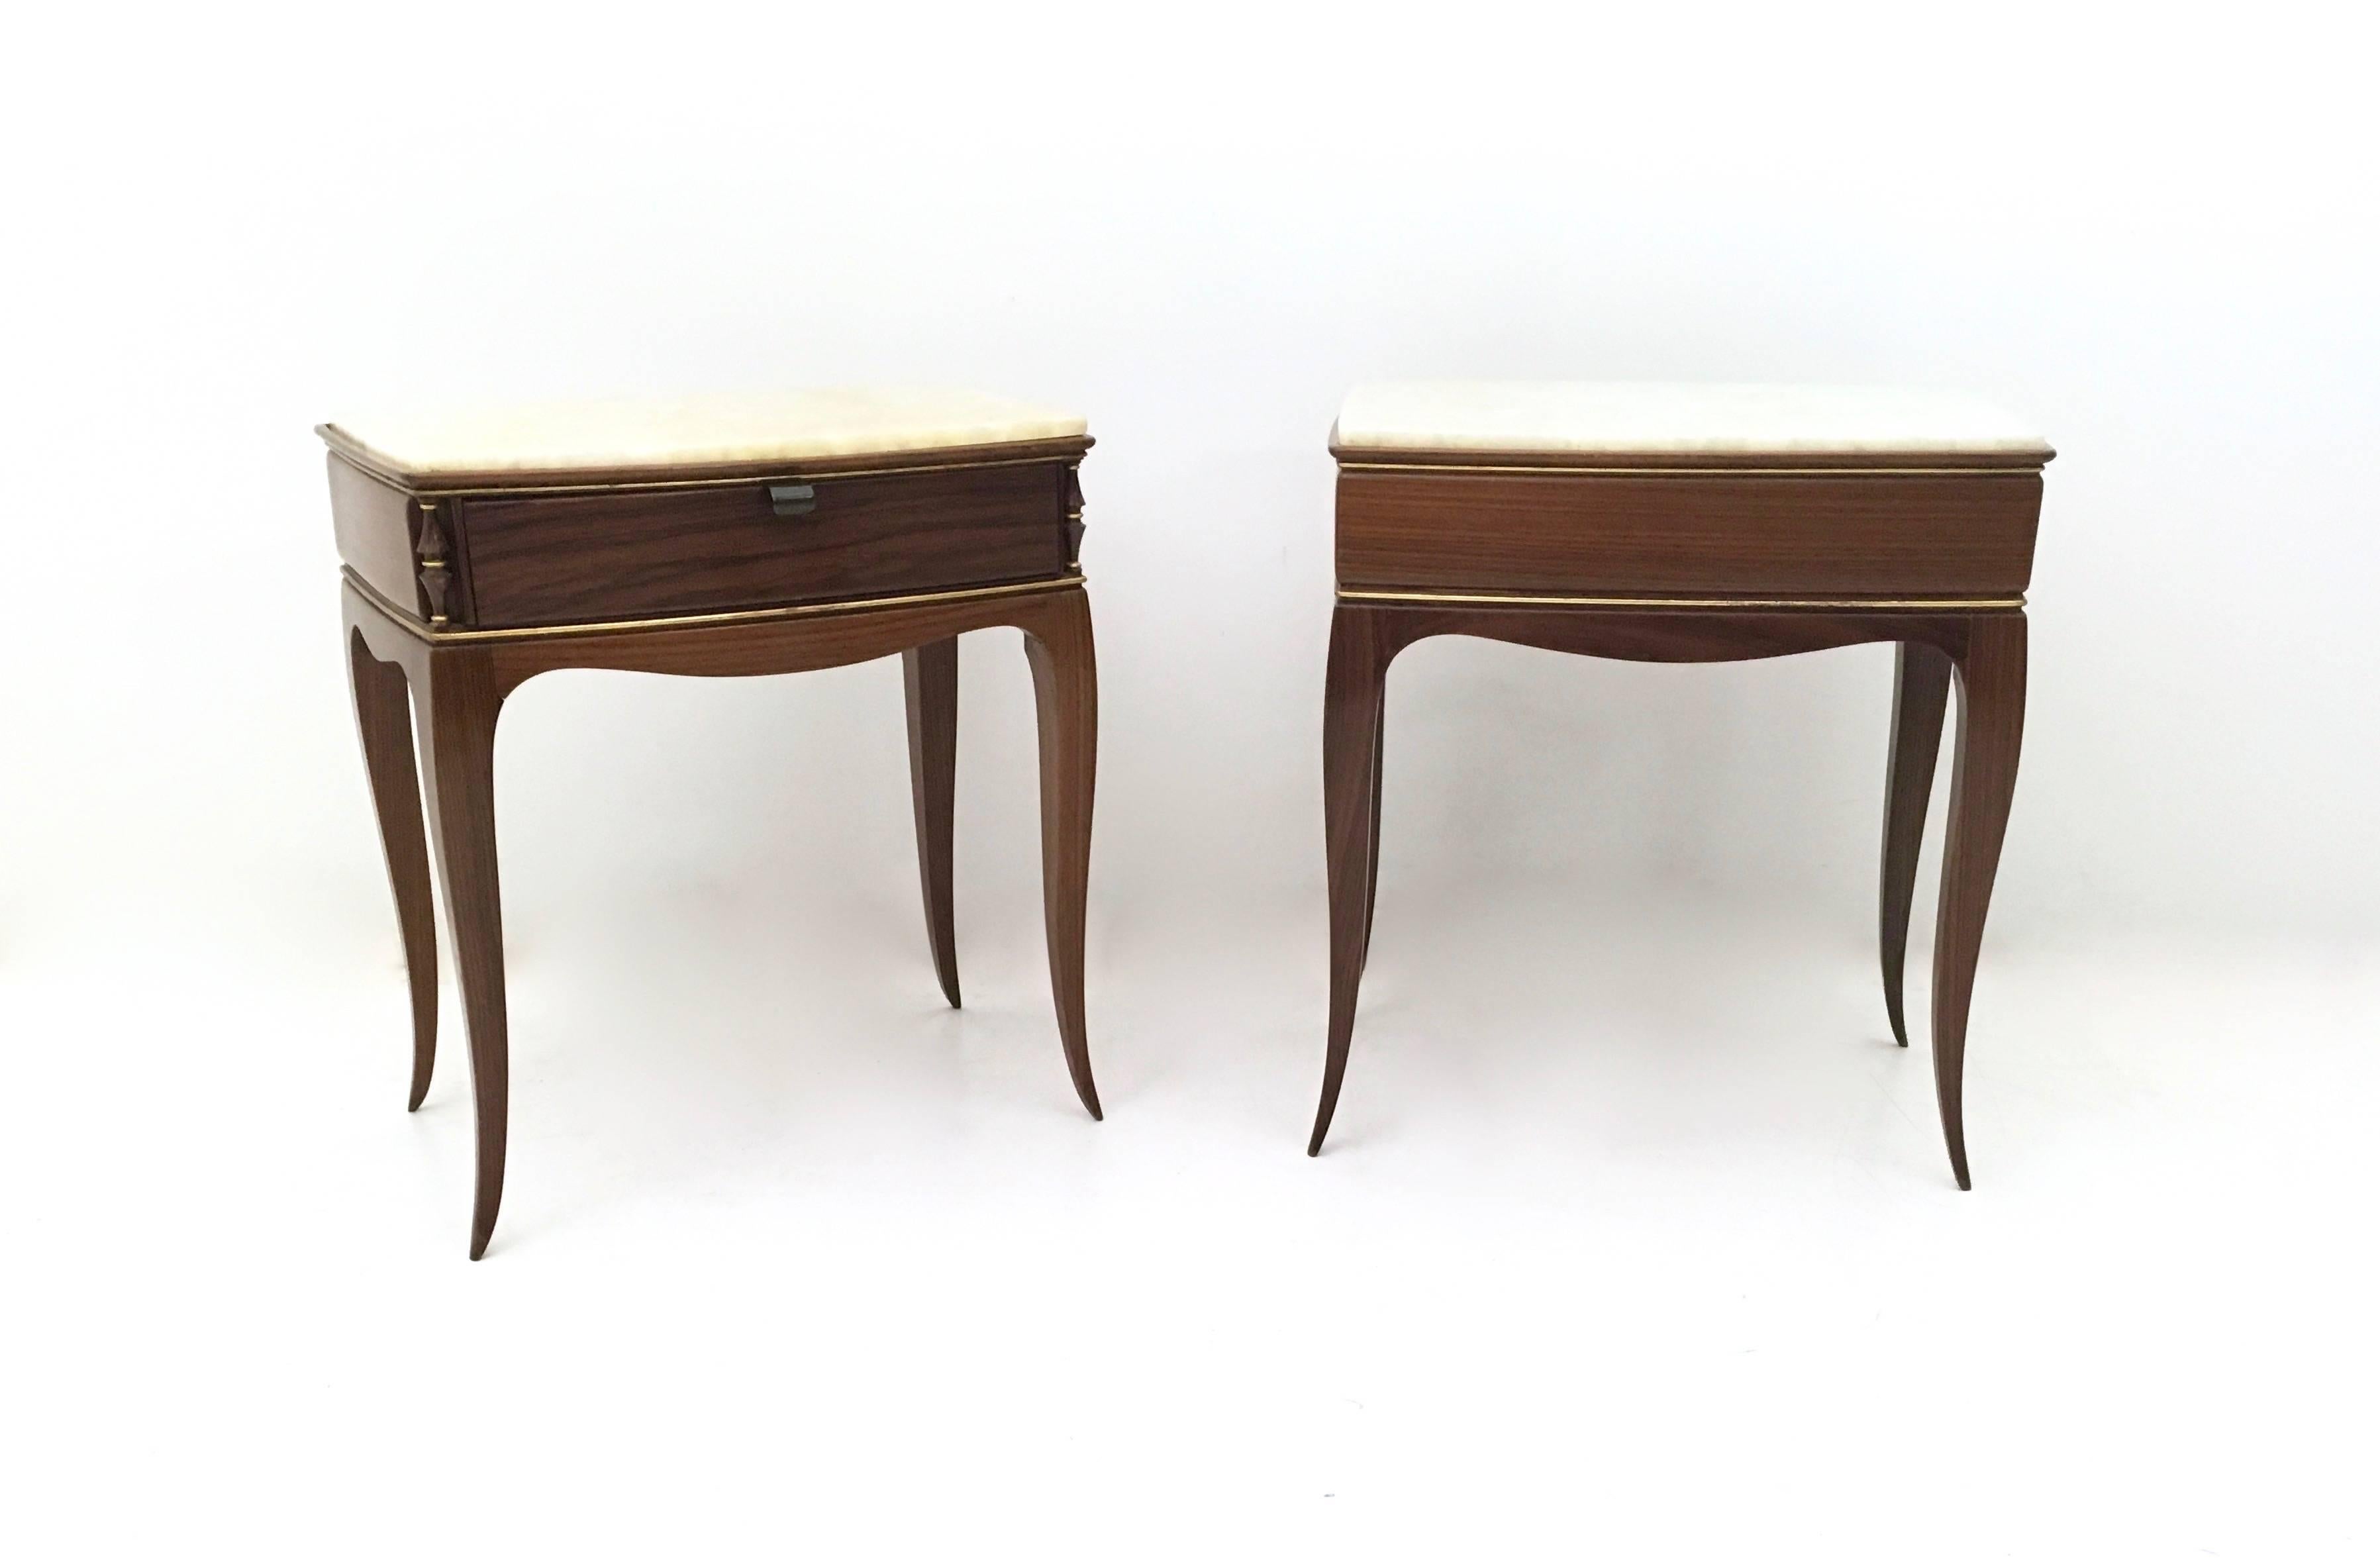 Burnished Pair of Beautiful Rosewood and Onyx Bedside Tables, Italy, 1950s